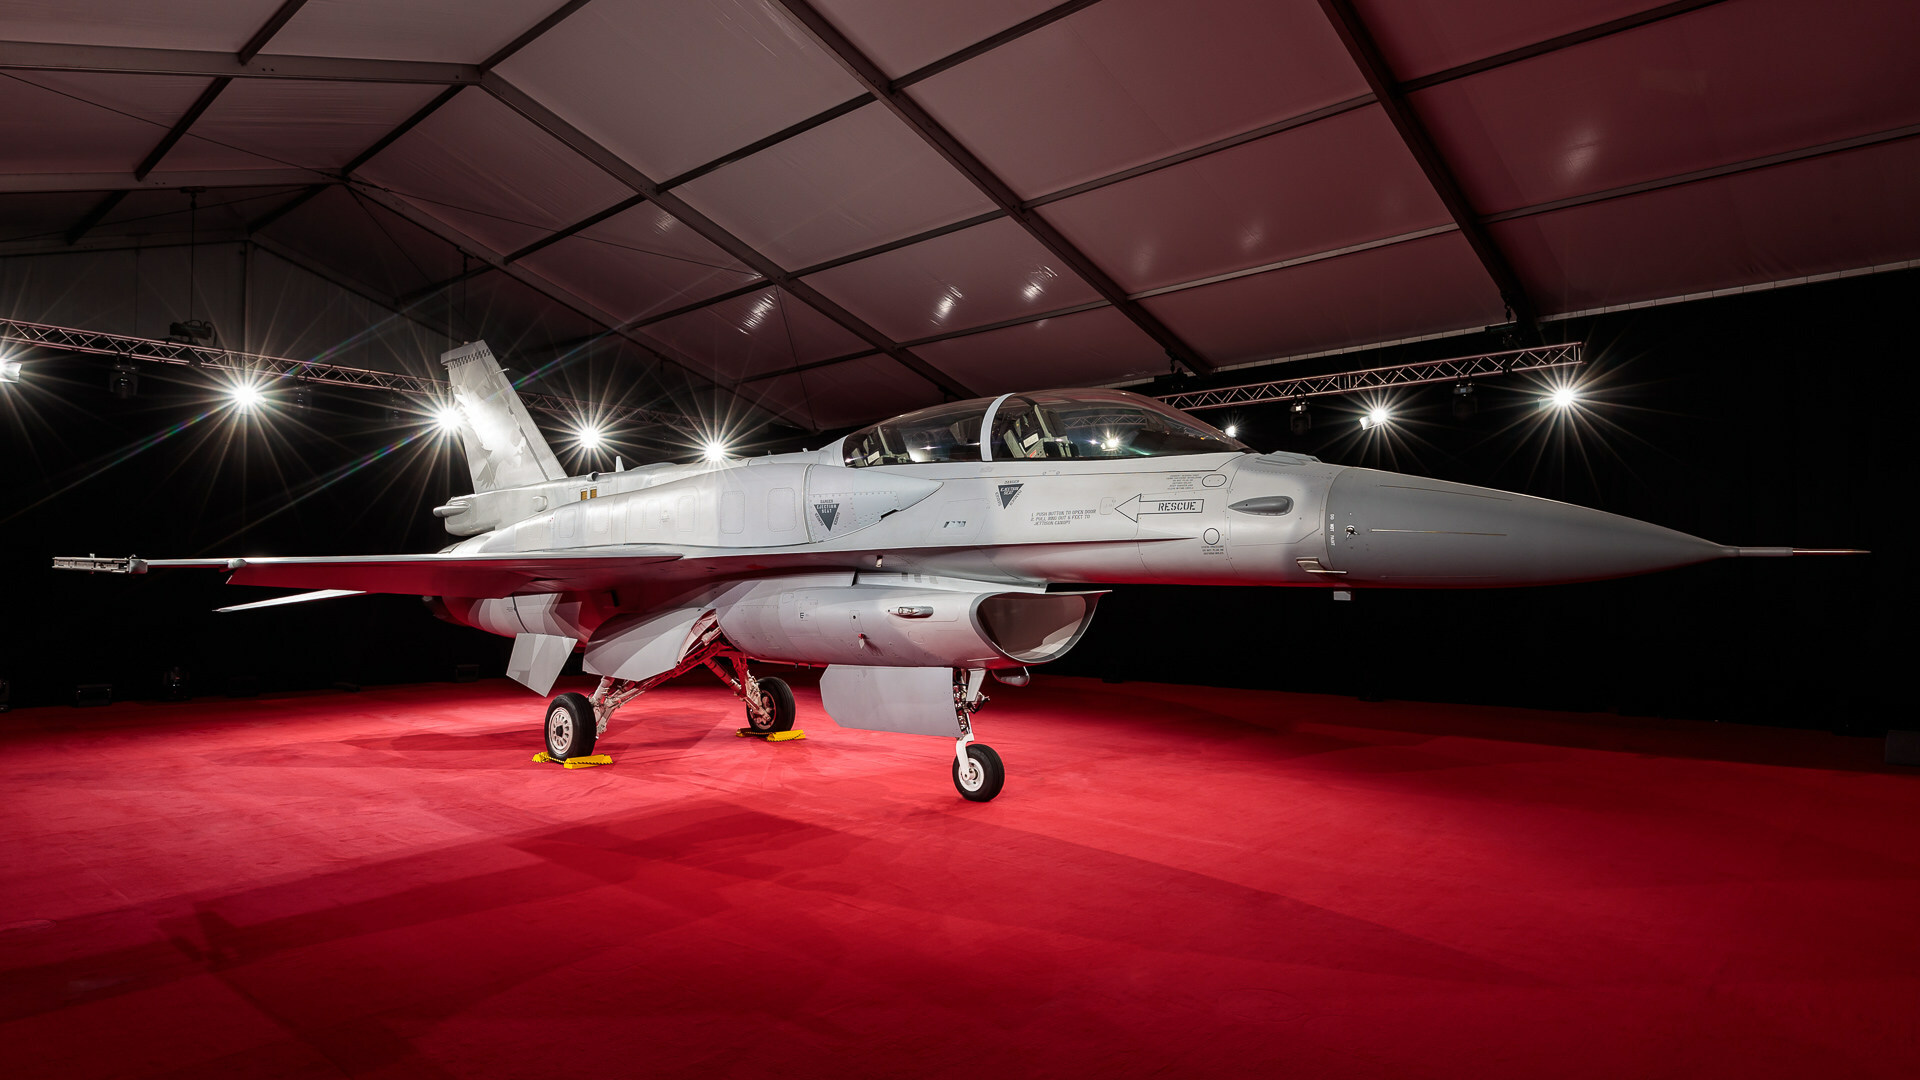 The first Royal Bahraini Air Force F-16 Block 70 was celebrated at Lockheed Martin